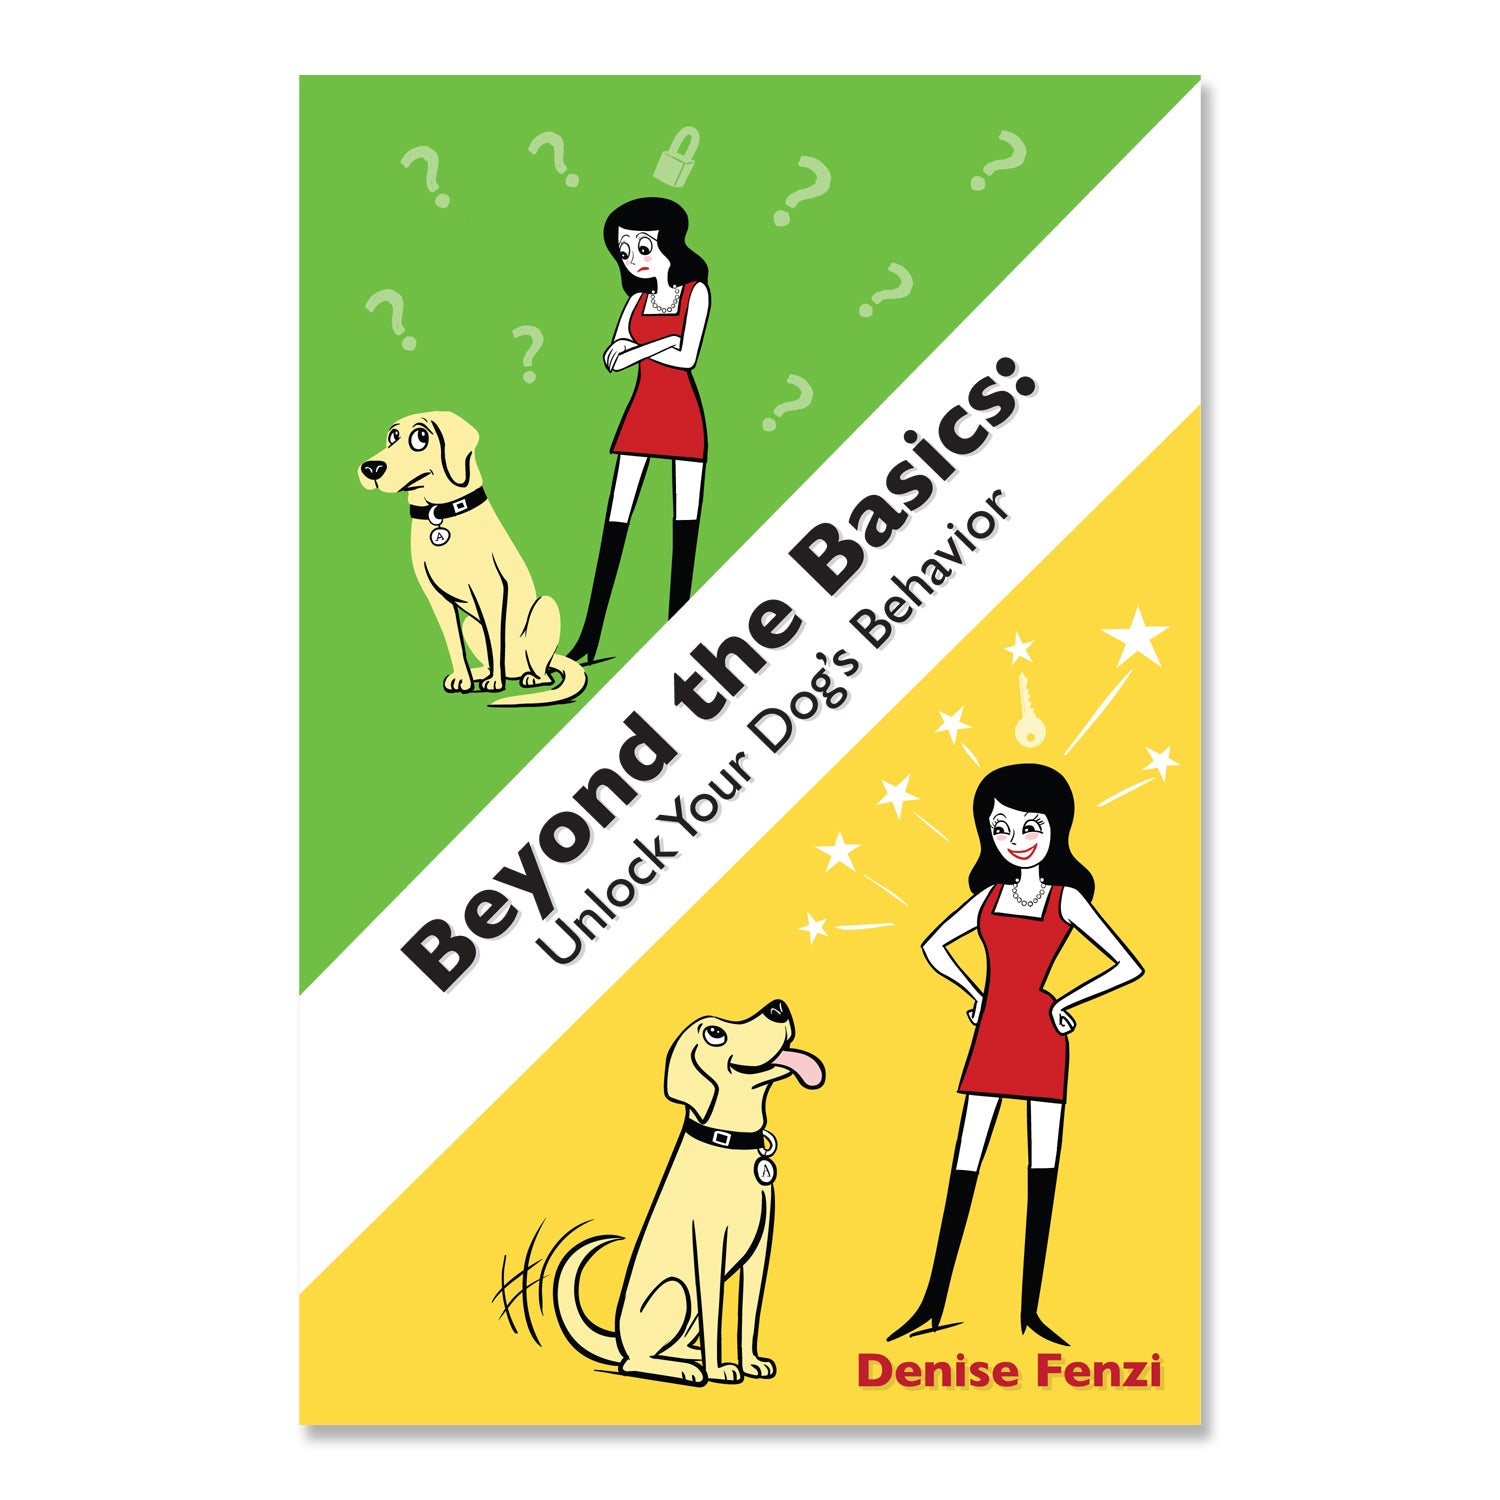 NINE FENZI BOOK PACK:  Dog Sports Skills Series 1,2, 3,4  AND Beyond The Back Yard AND Beyond the Basics AND Train the Dog in Front of You AND Blogger Dog, Brito!